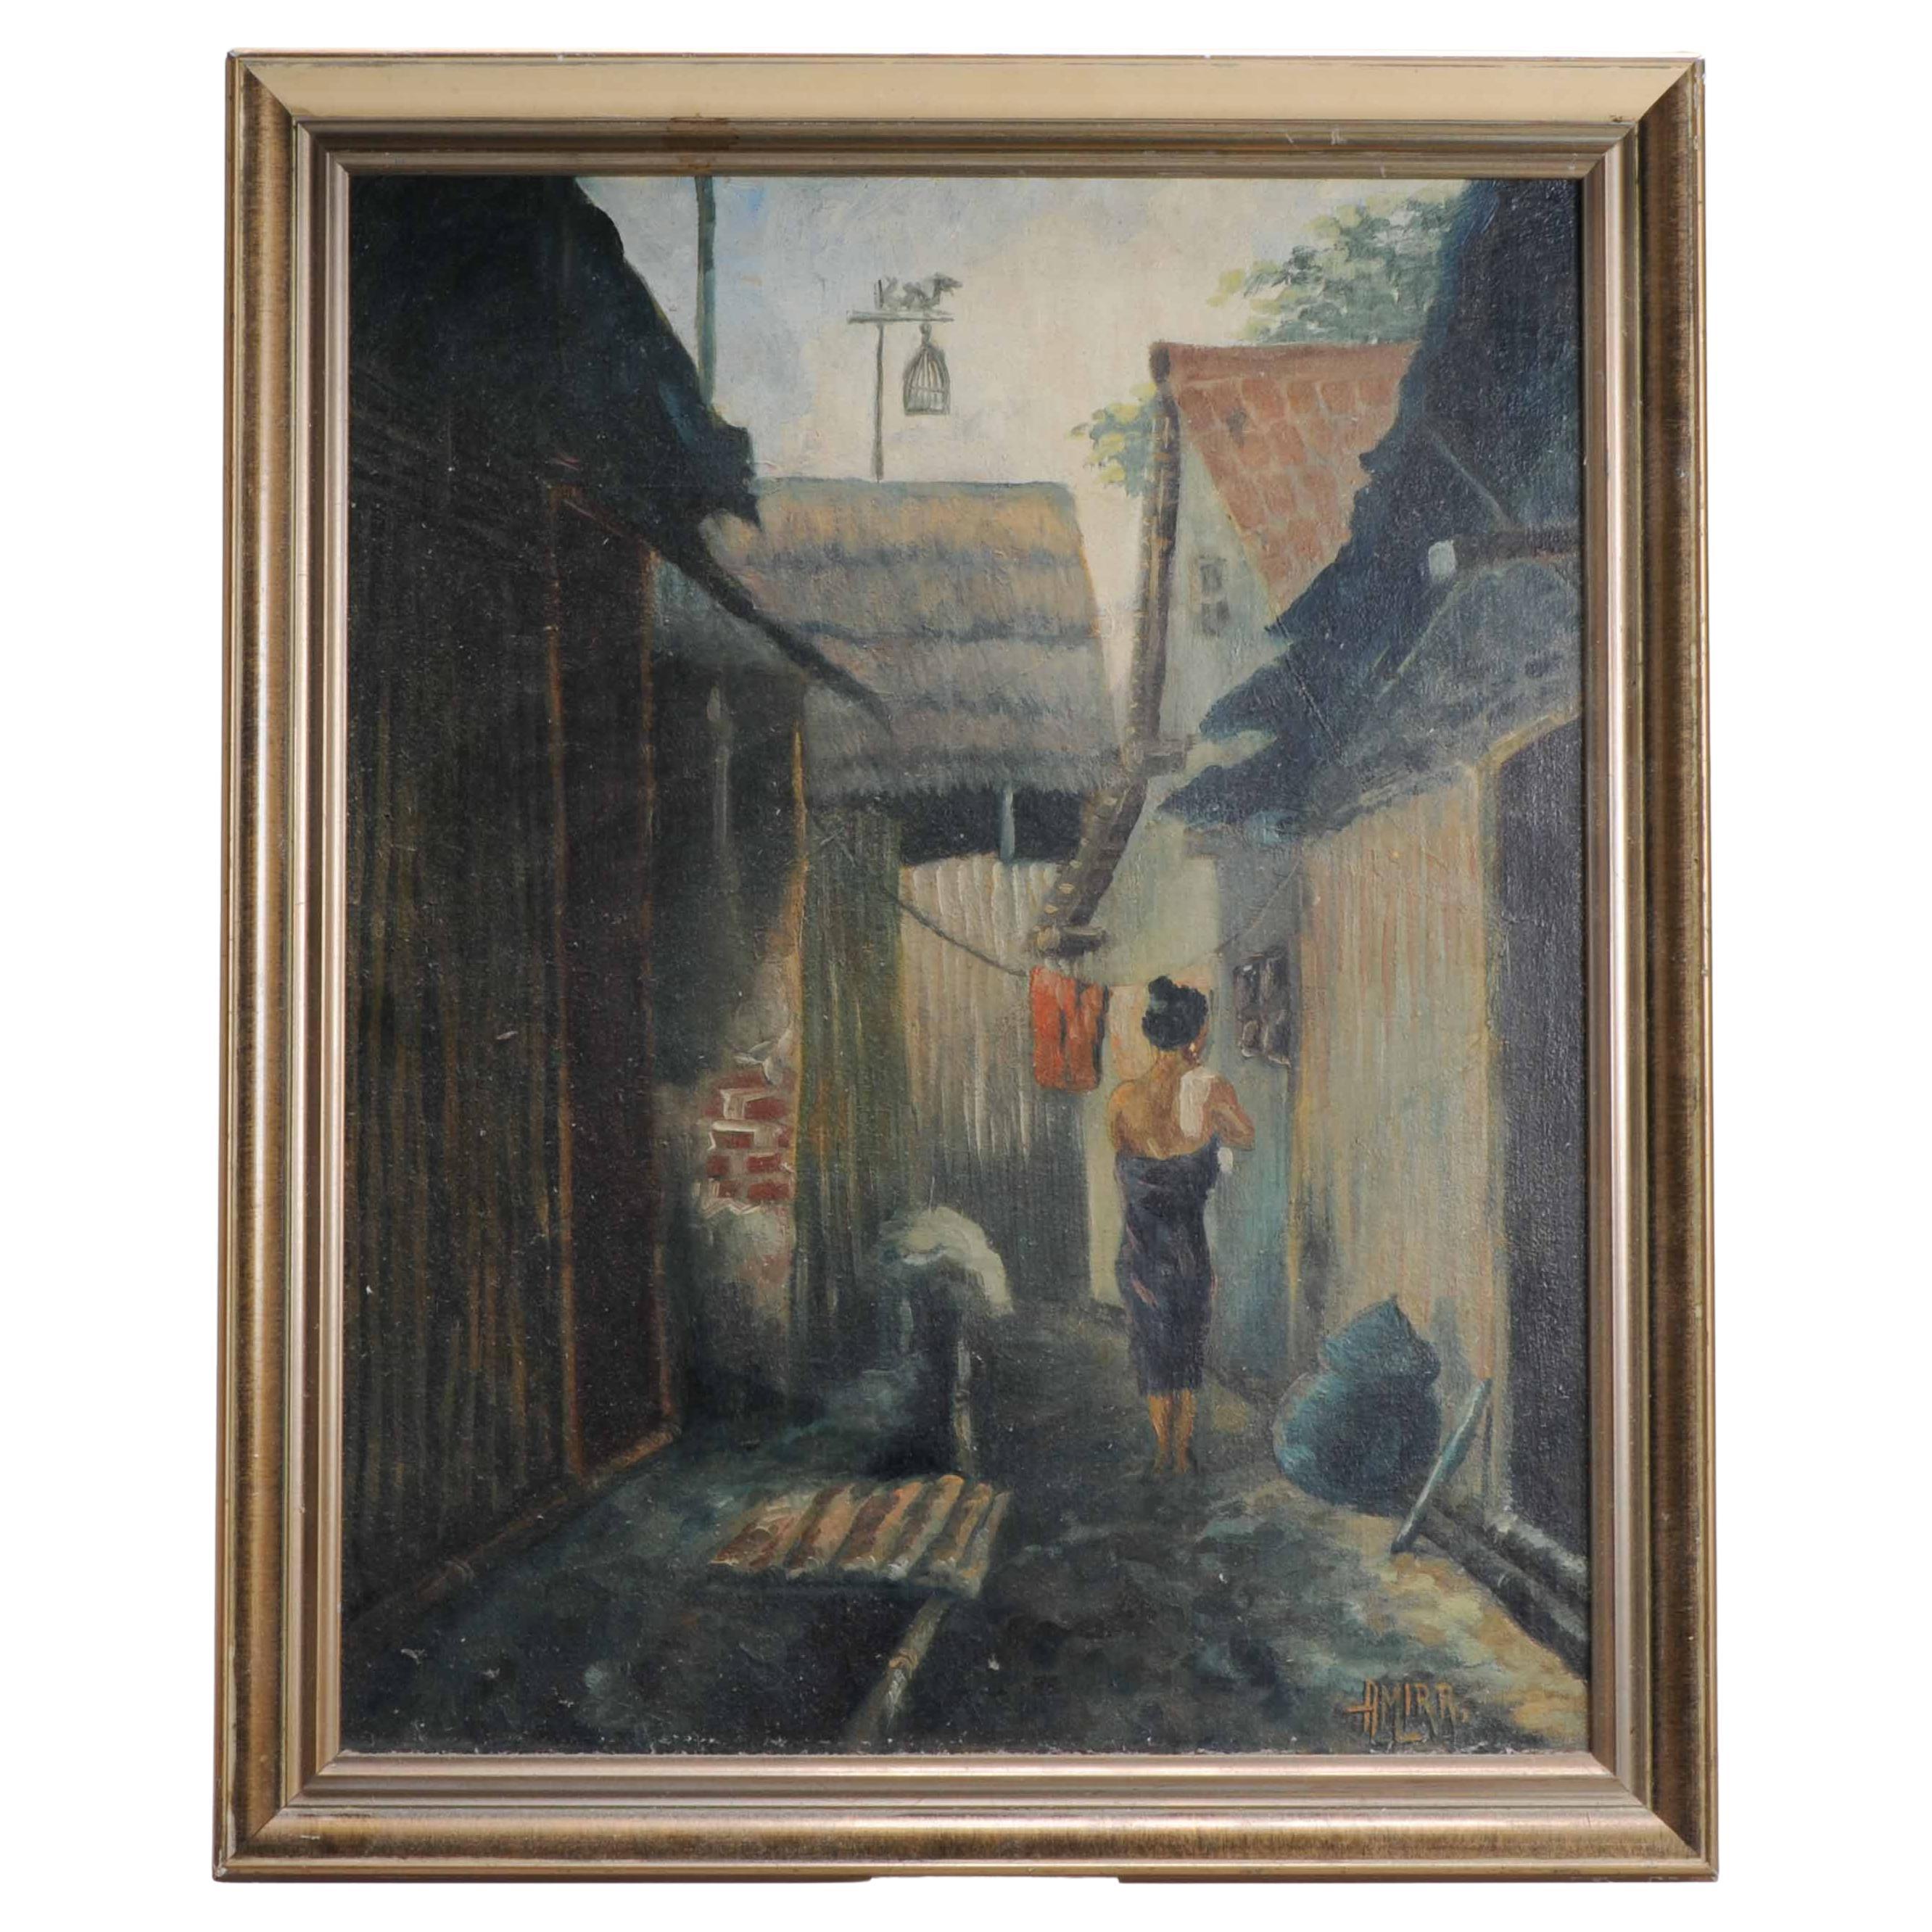 Antique / Vintage Painting Indonesia Bali / Indonesia Lady in Village Scene For Sale